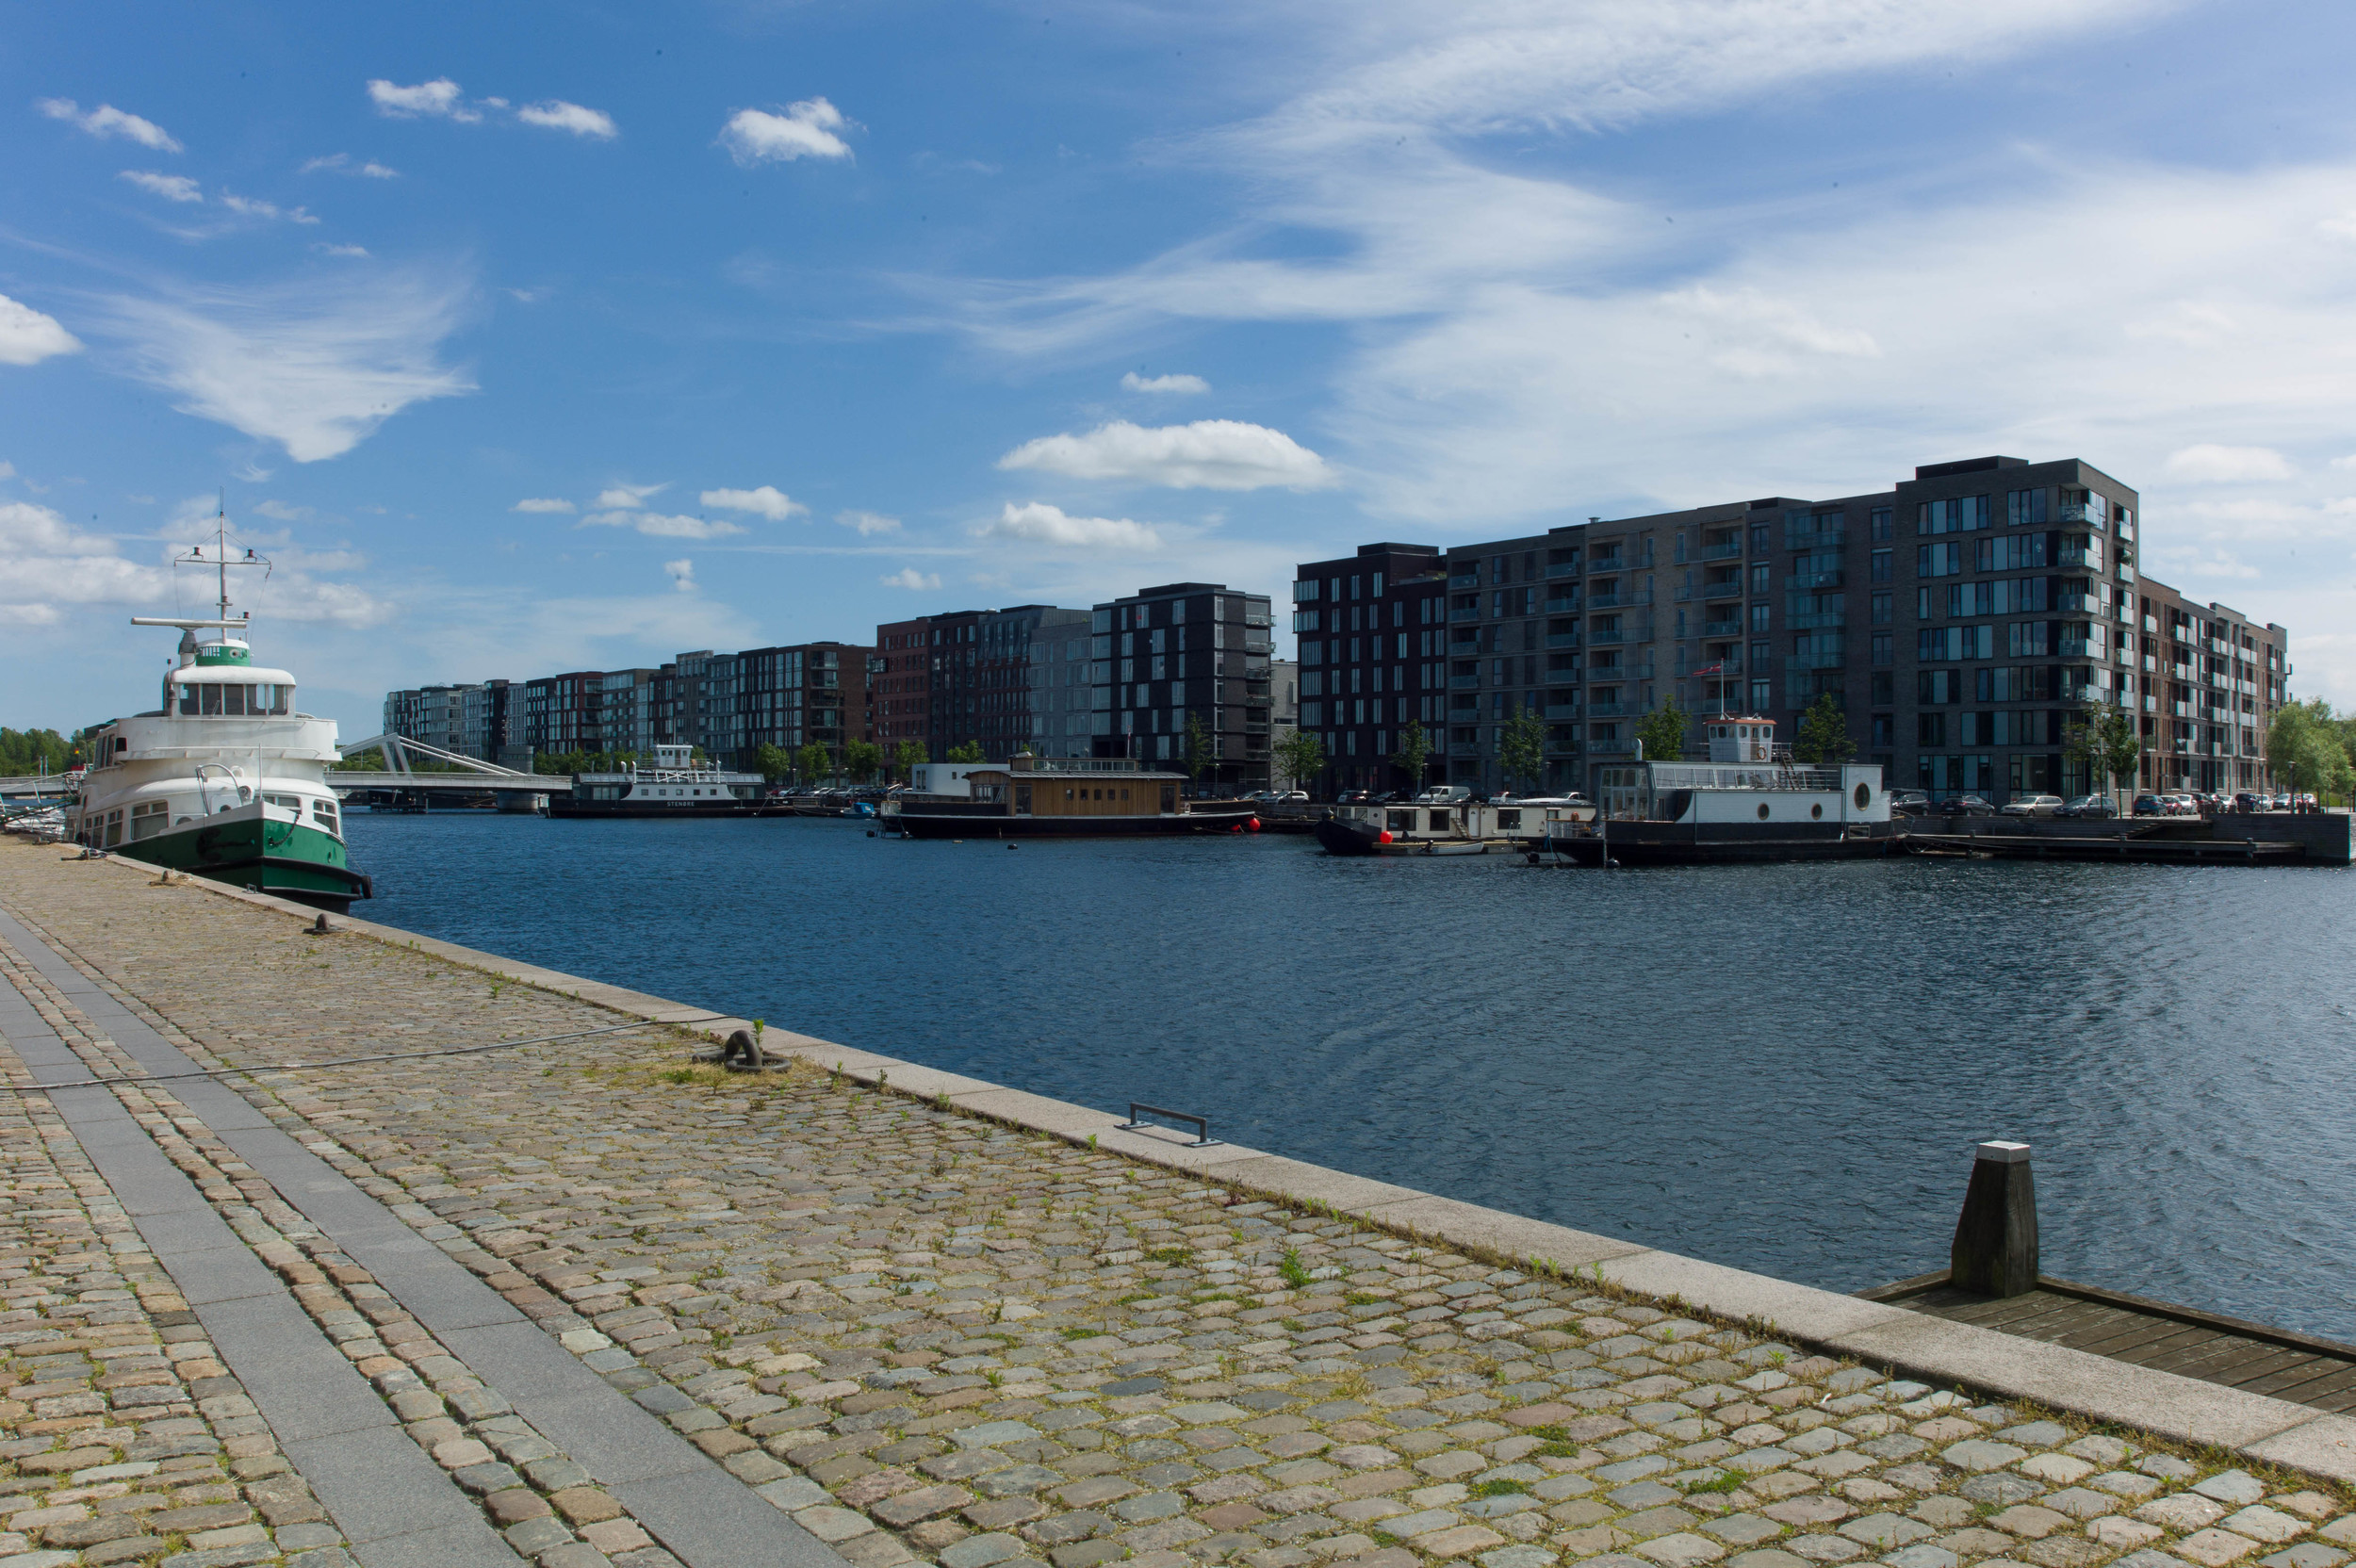   View of the new apartments at the south end of the inner harbour at Sluseholmen from the Teglholmen side  